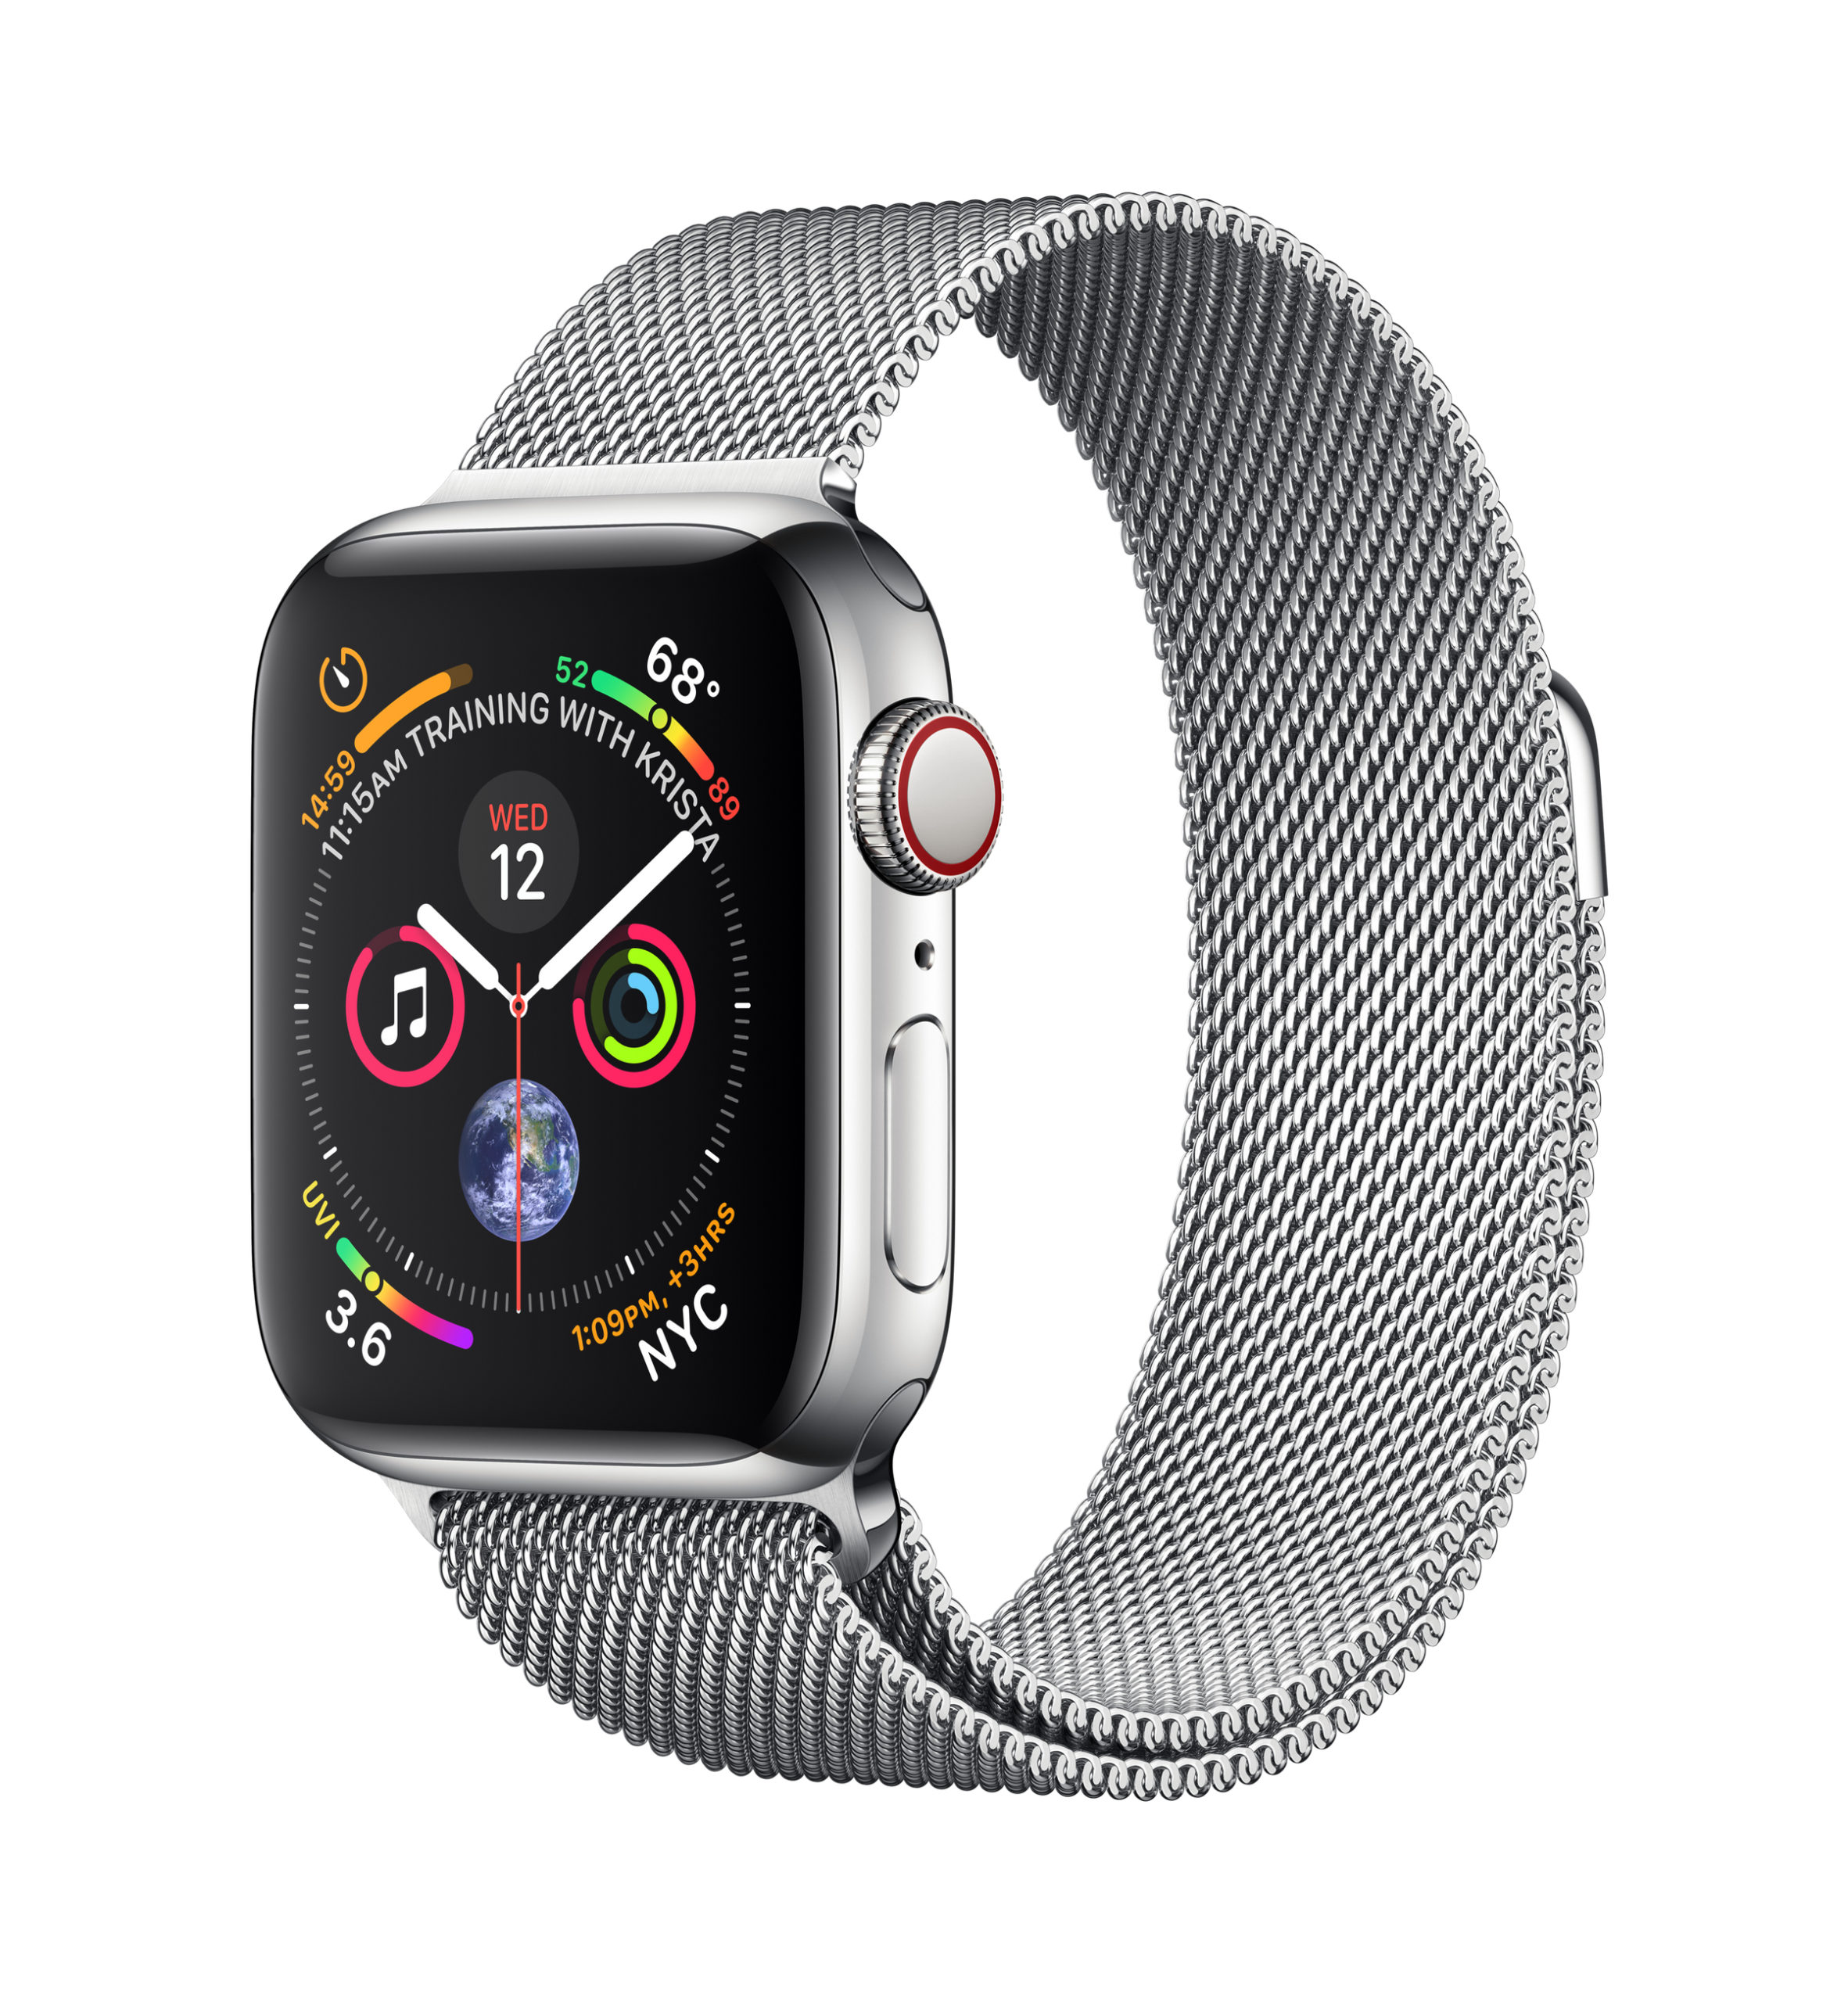 MTUM2LL/A - $347 - Apple Watch Series 4 GPS + Cellular 40mm Stainless Steel, Milanese Loop